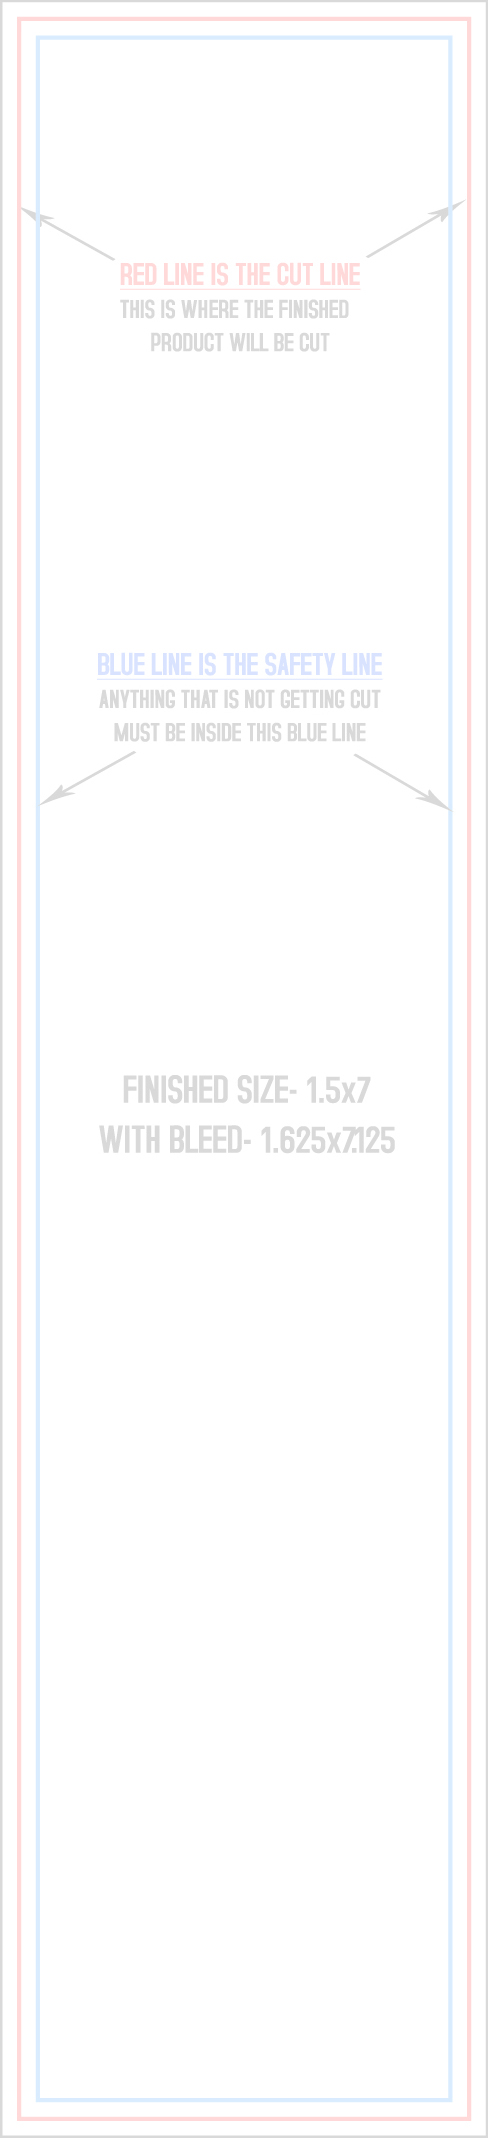 Folded Card Template for 8.5x11 Paper/ 4x6, 5x7/ PSD, PNG, JPEG, Tiff -   Finland